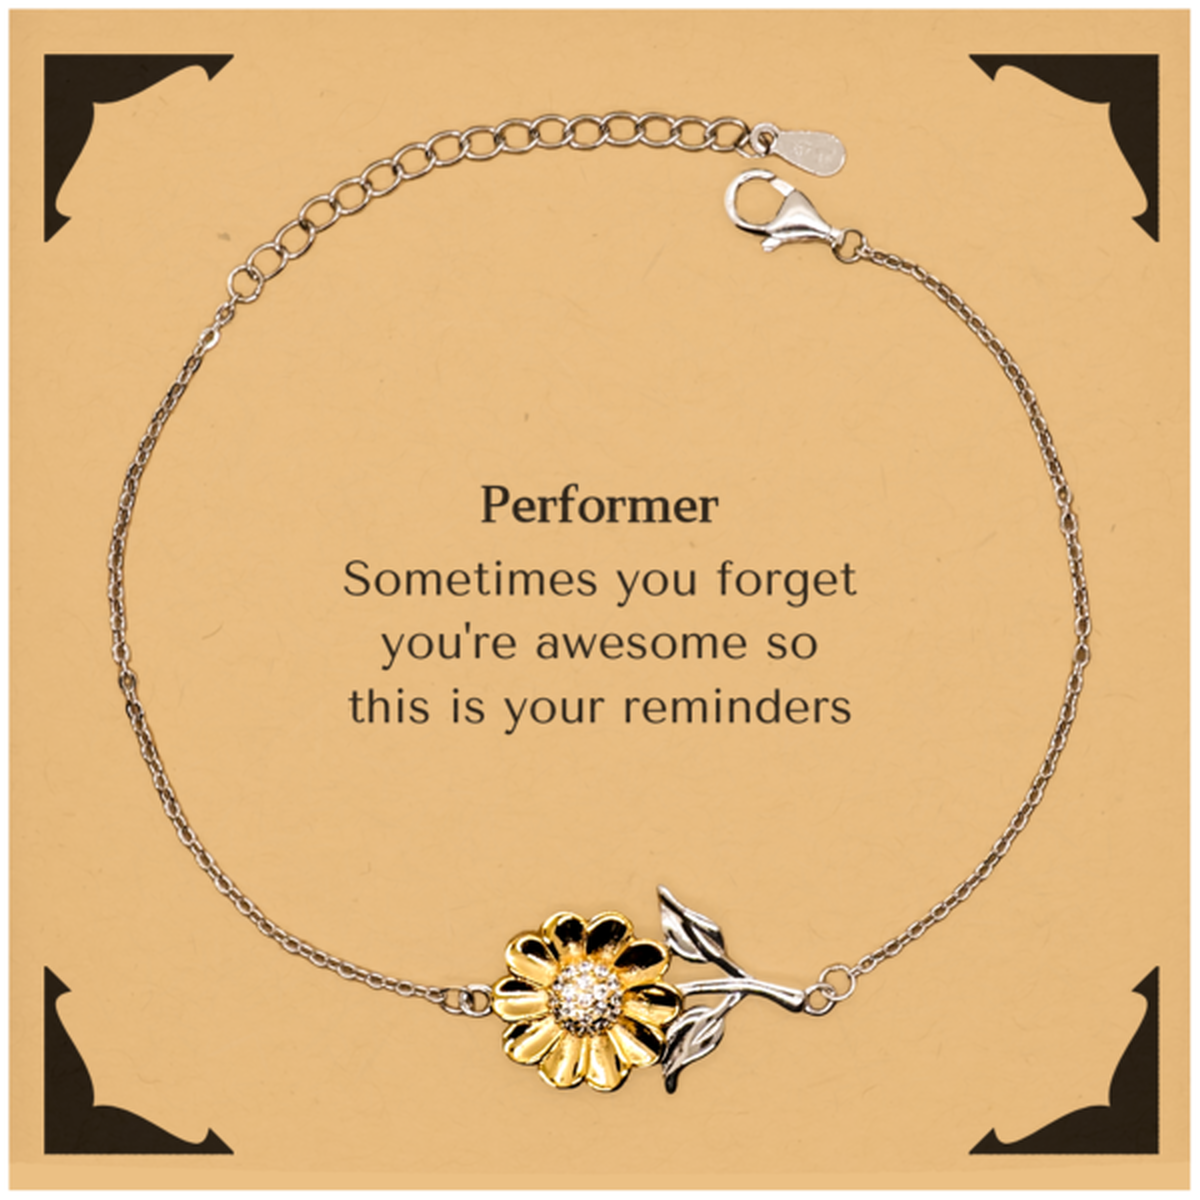 Sentimental Performer Sunflower Bracelet, Performer Sometimes you forget you're awesome so this is your reminders, Graduation Christmas Birthday Gifts for Performer, Men, Women, Coworkers